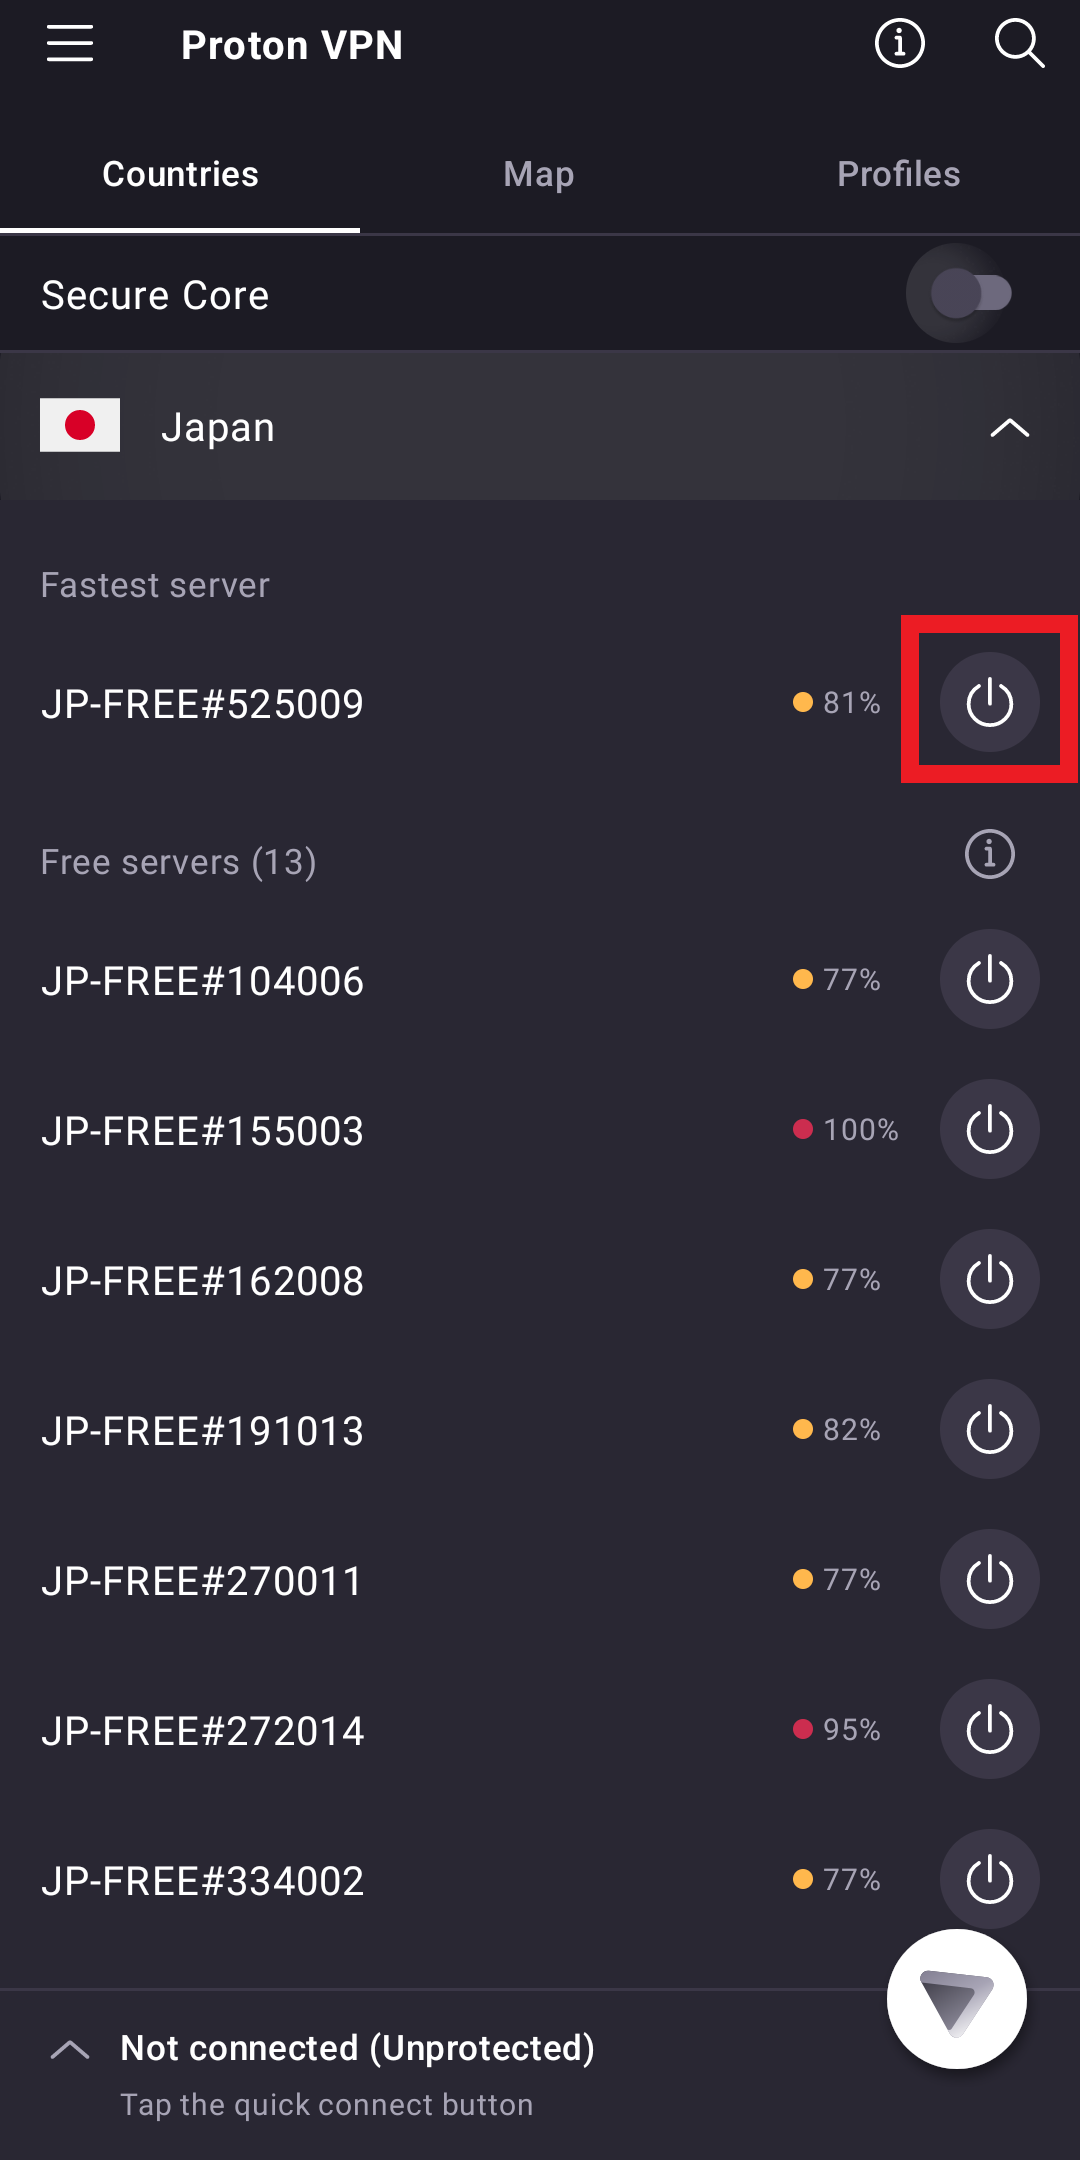 Tap on the power icon to connect to the servers. 